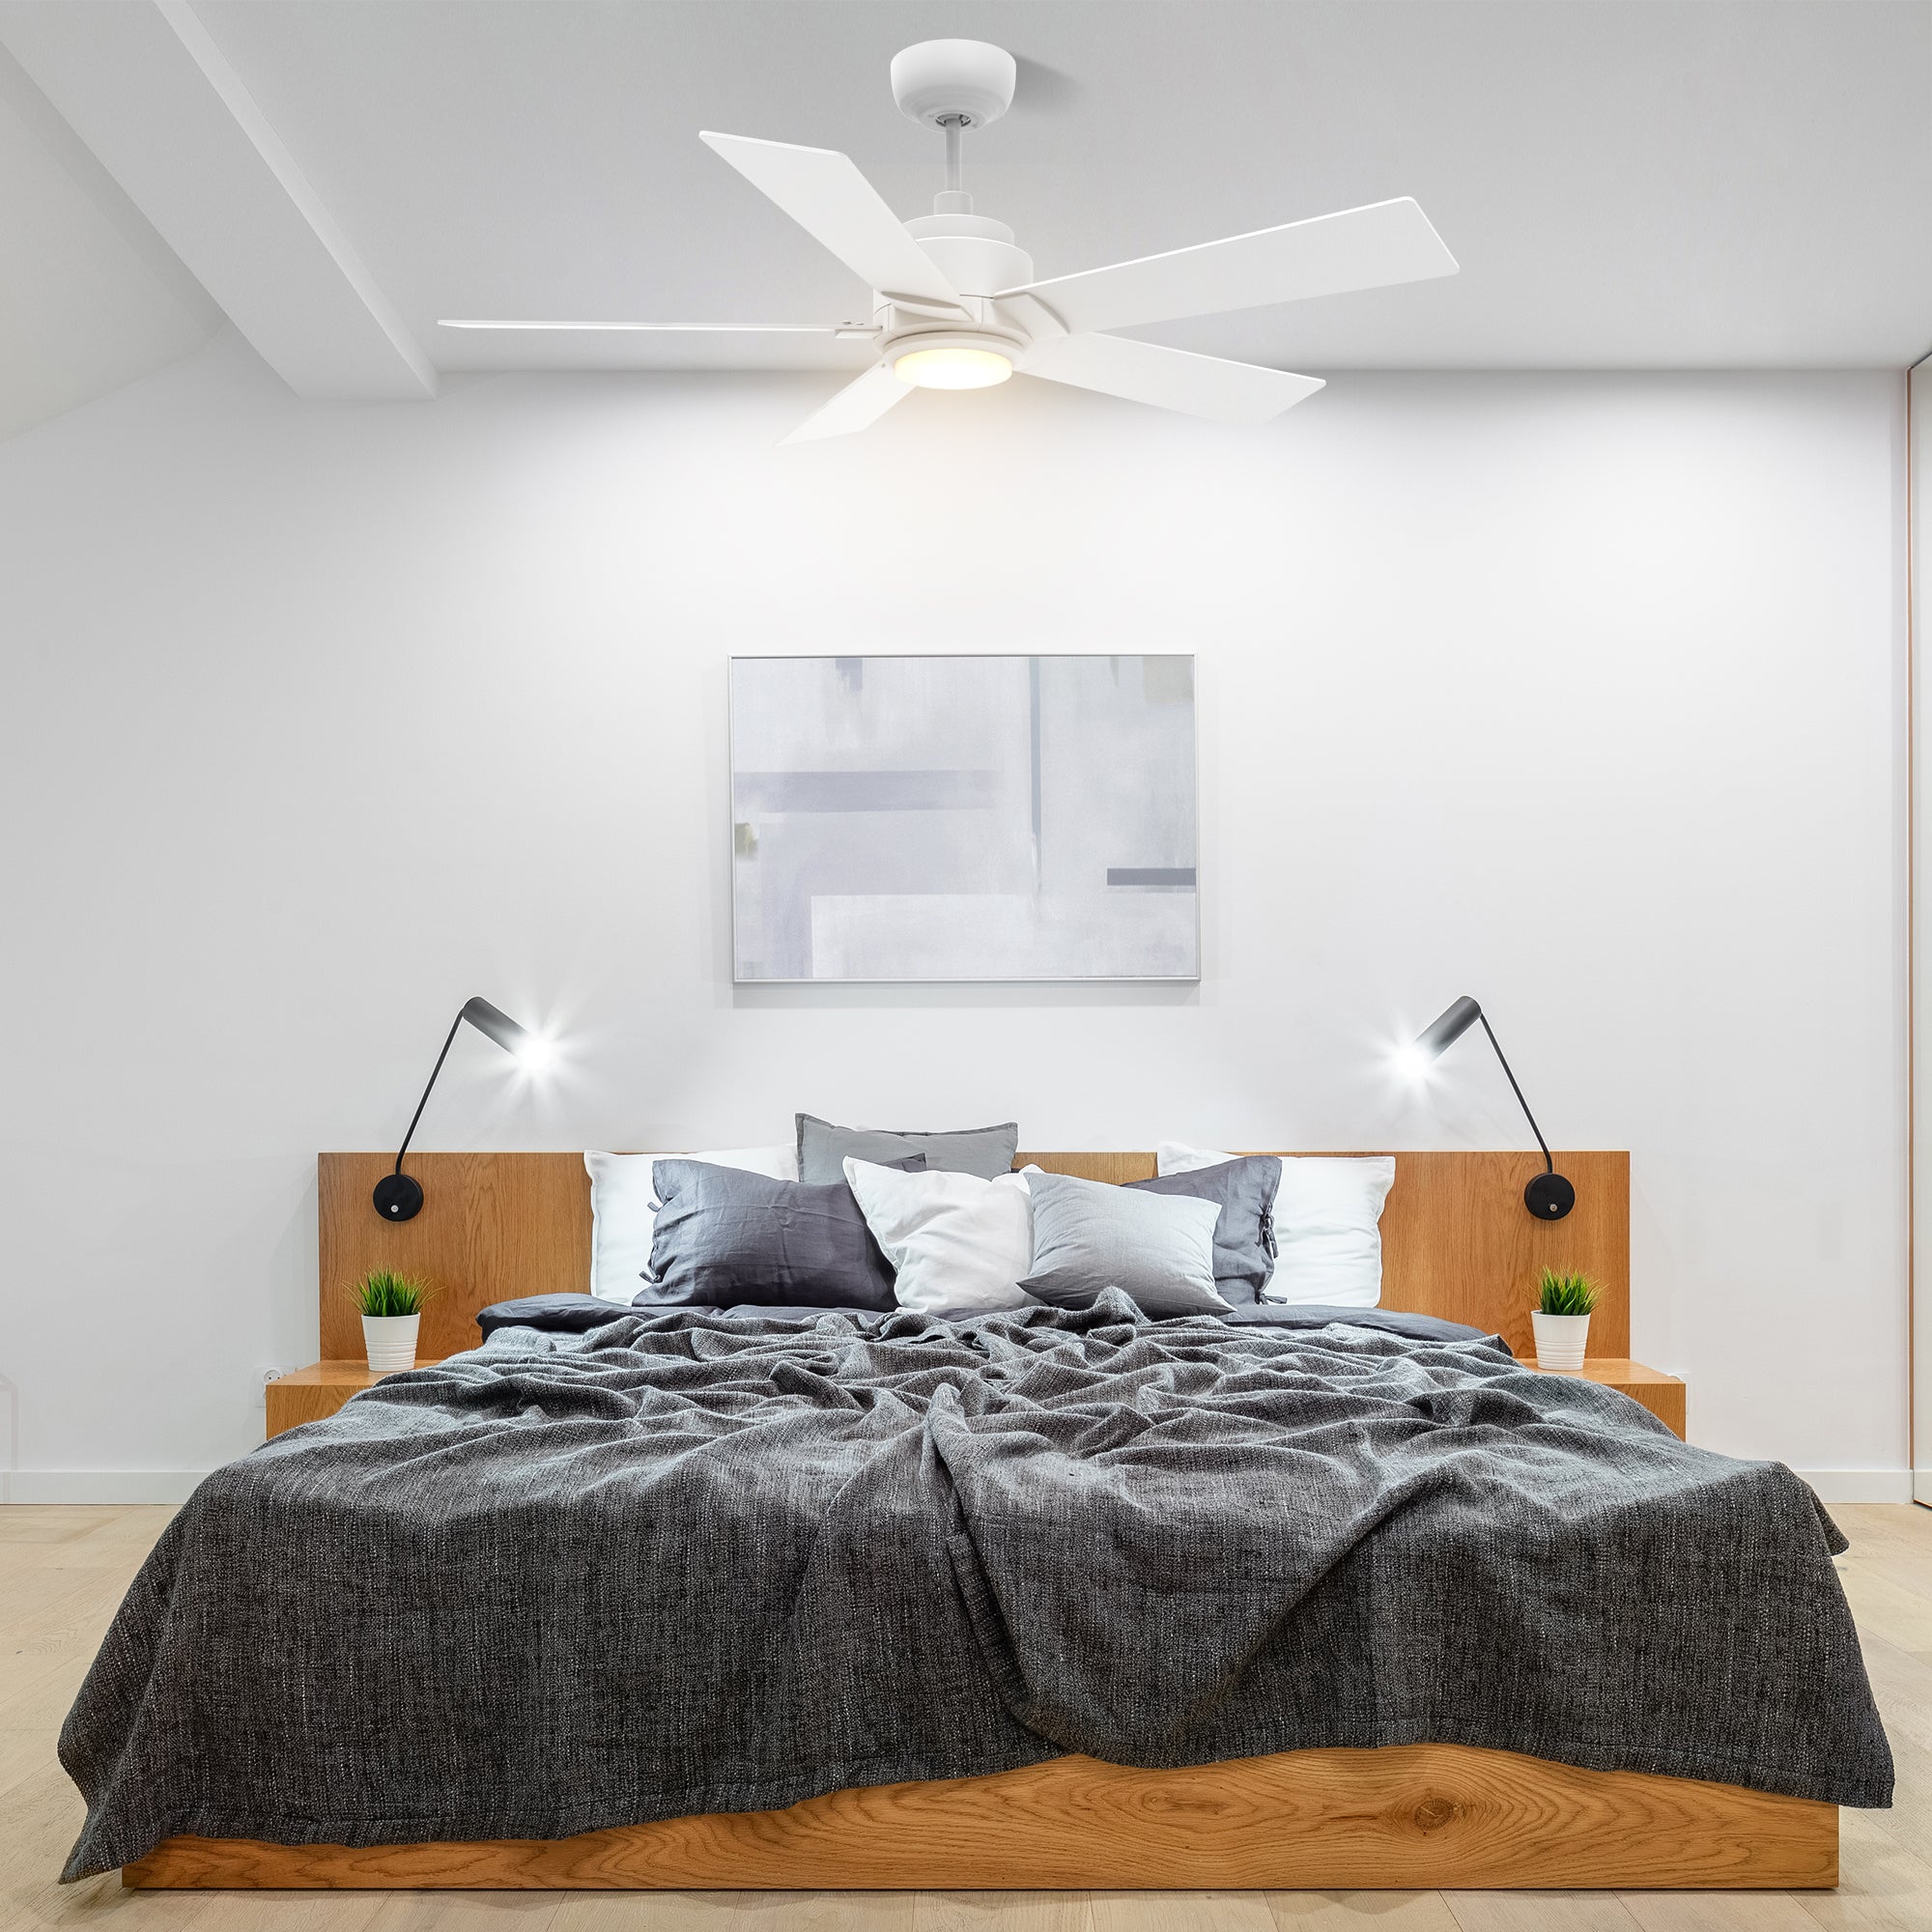 This Aspen 56&#39;&#39; smart ceiling fan keeps your space cool, bright, and stylish. It is a soft modern masterpiece perfect for your large indoor living spaces. This Wifi smart ceiling fan is a simplicity designing with White finish, use elegant Plywood blades and has an integrated 4000K LED cool light. The fan features Remote control, Wi-Fi apps, Siri Shortcut and Voice control technology (compatible with Amazon Alexa and Google Home Assistant ) to set fan preferences. 